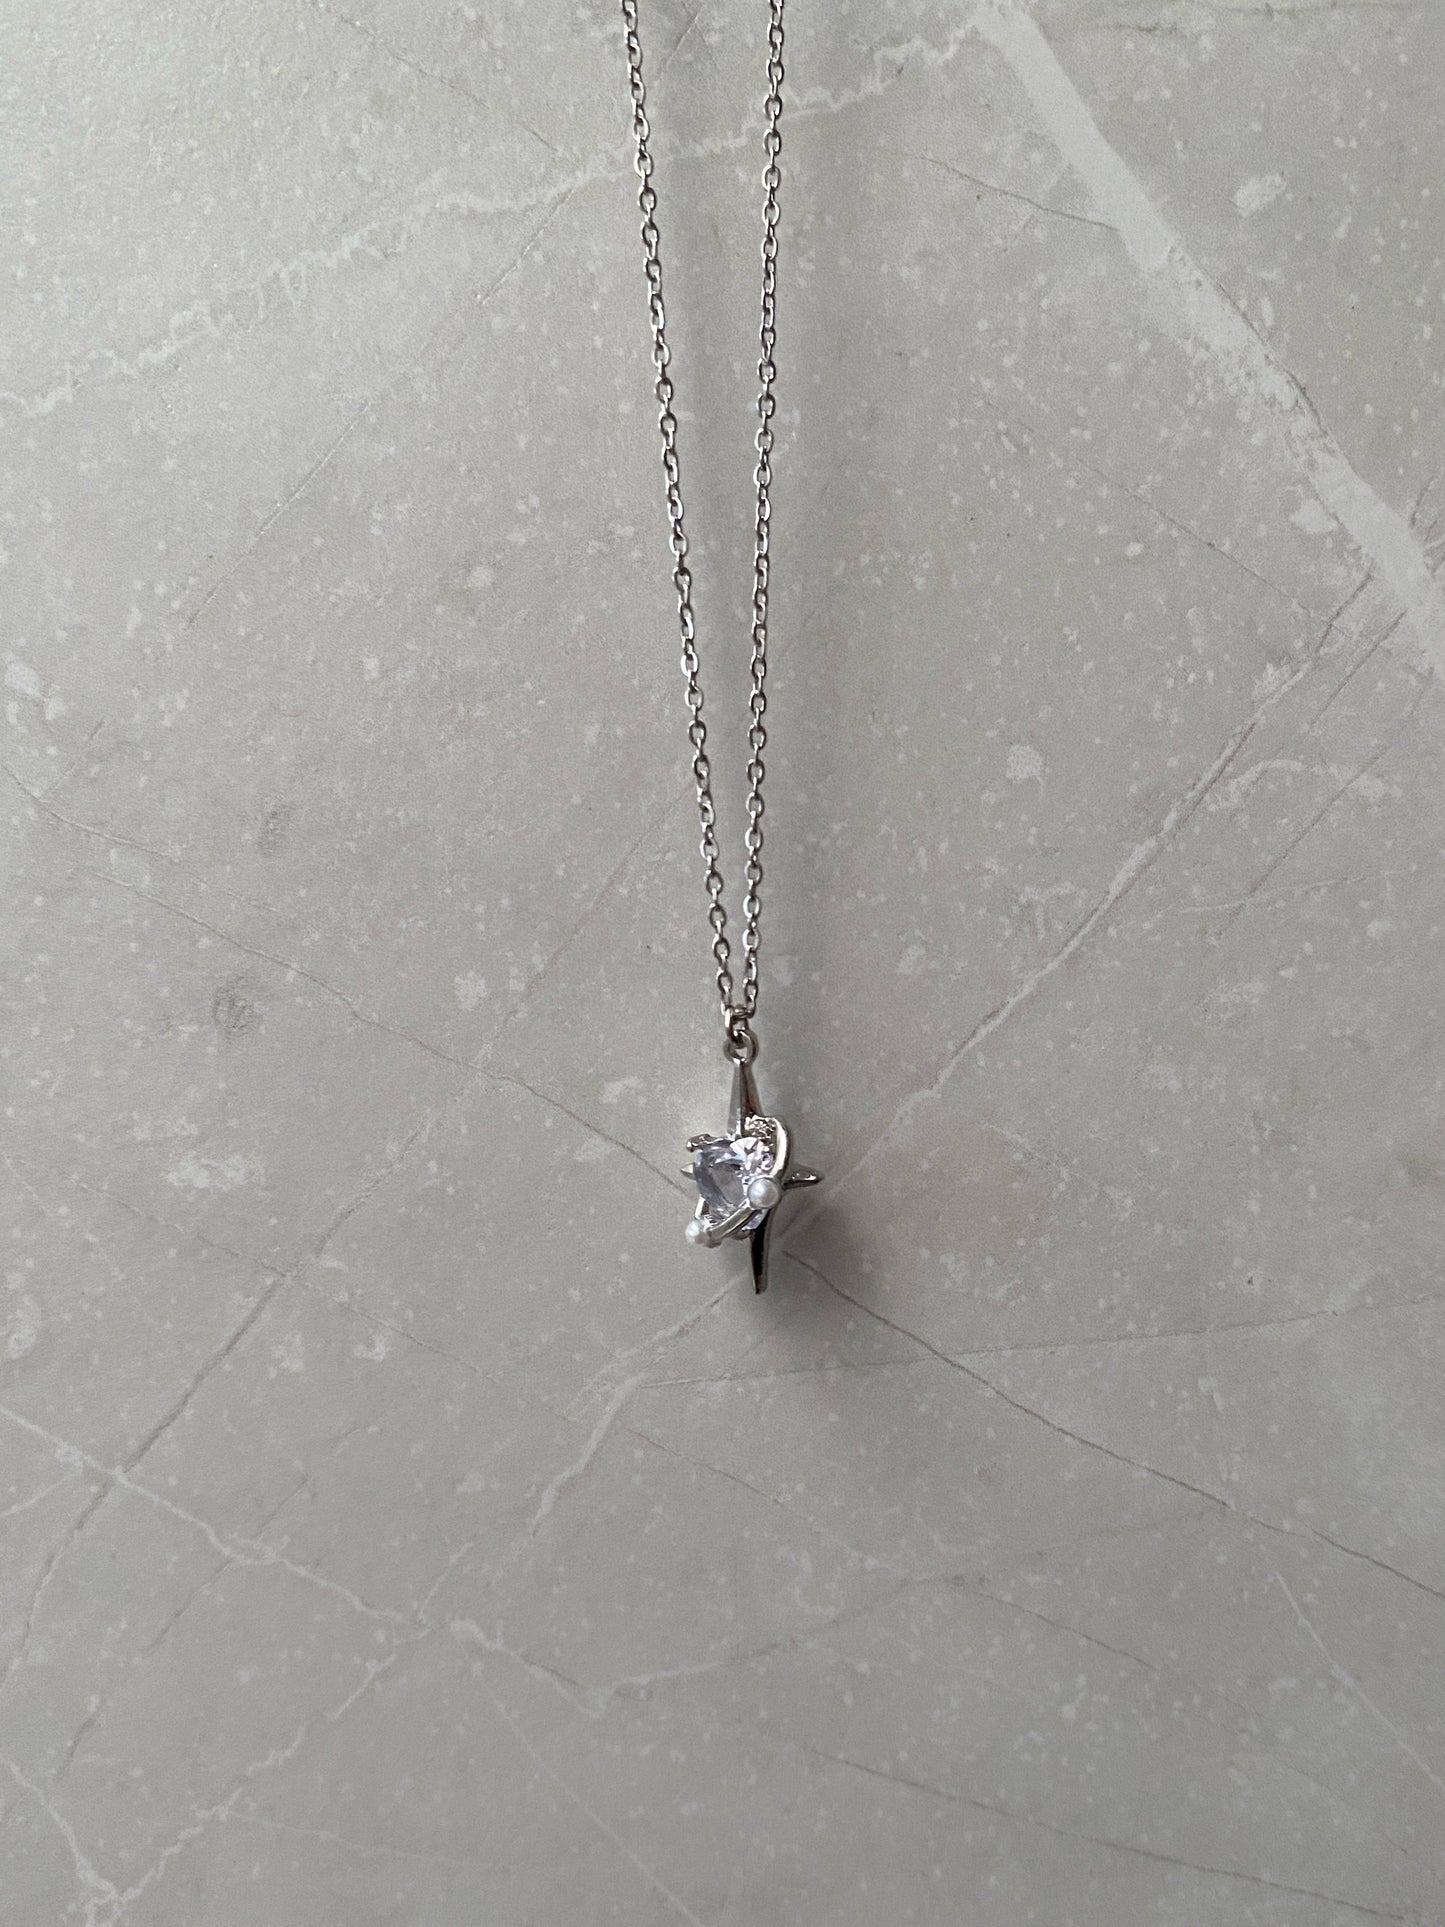 SILVER SPARKLE NECKLACE WITH CRYSTAL HEART IN THE MIDDLE